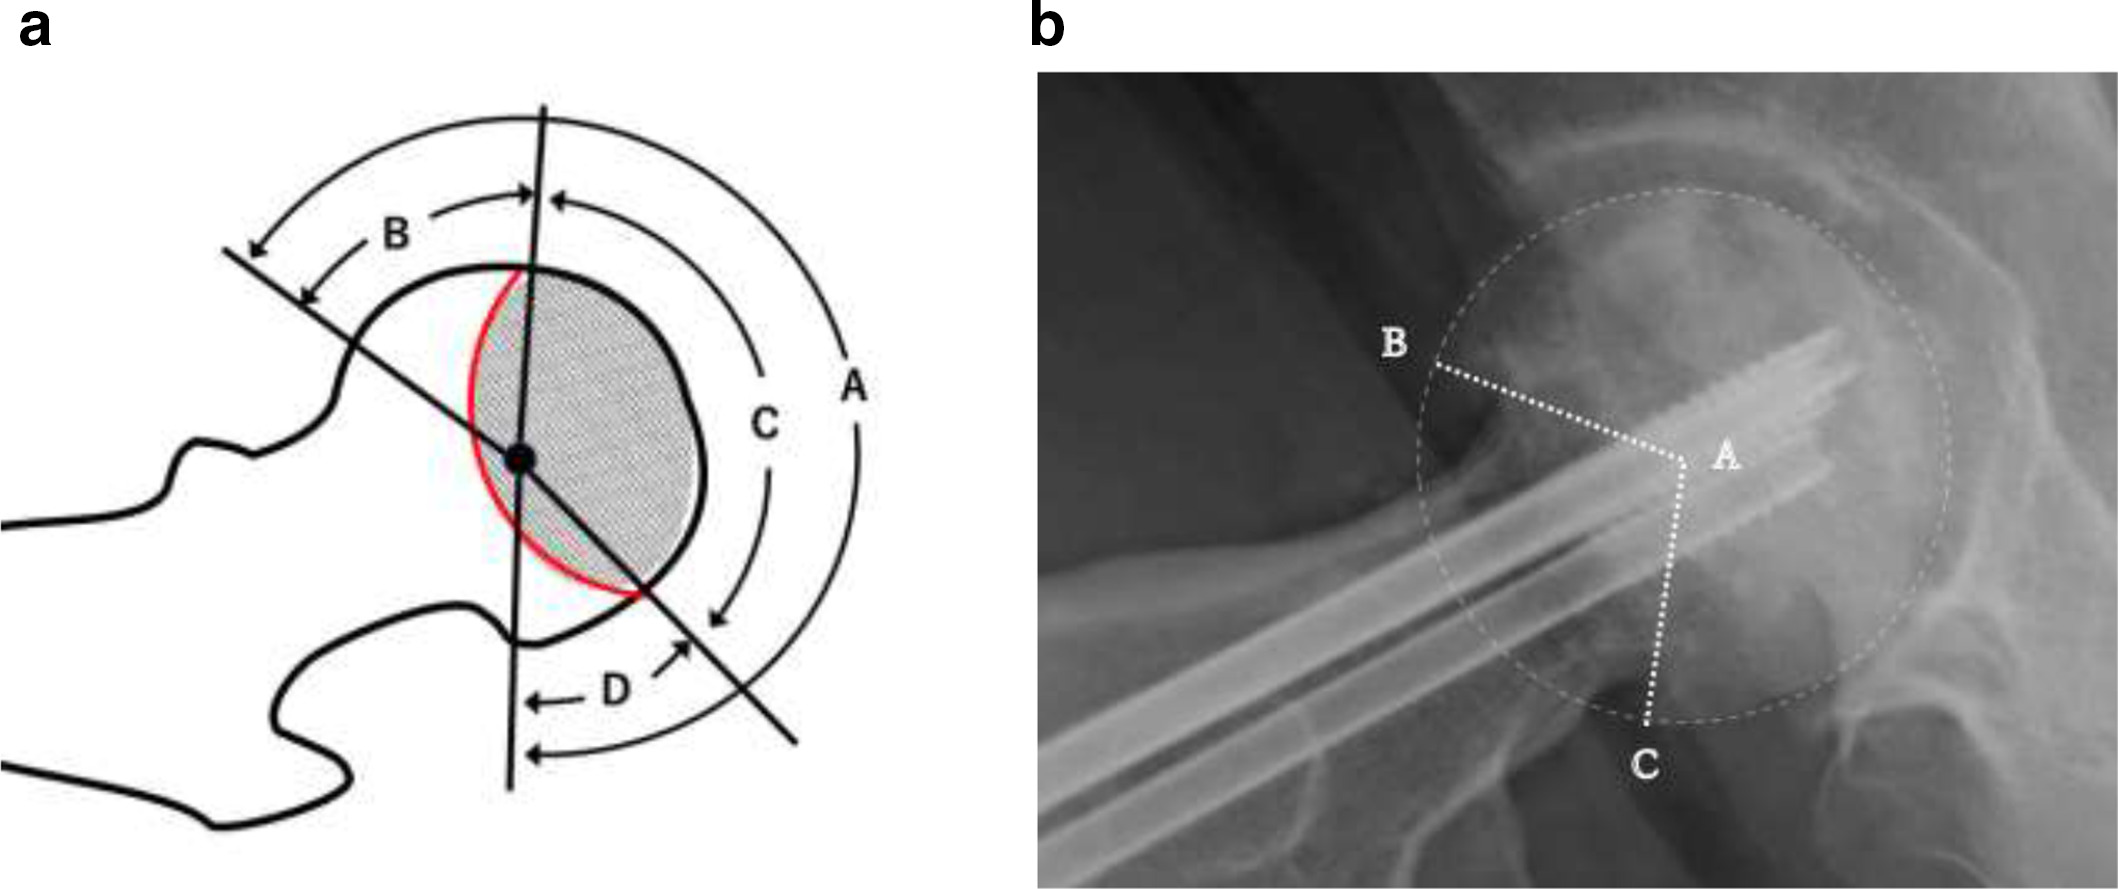 Fig. 1 
            a) Diagram showing the method for measuring the extent of the viable and necrotic areas of the femoral head on the lateral radiograph (Sugioka view). The ratio of the anterior viable area was calculated by dividing angle B (anterior reference point of the articular surface) by angle A (centre of the femoral head). The ratio of the posterior viable area was calculated by dividing angle D (posterior reference point of the articular surface) by angle A. The ratio of the necrotic area was calculated by dividing angle C (necrotic area from anterior to posterior point of the articular surface) by angle A. b) Evaluation of the articular surface in a case where the margin was unclear due to depression of the fracture. The distal end of the femoral head was used as the reference point for the articular surface.
          